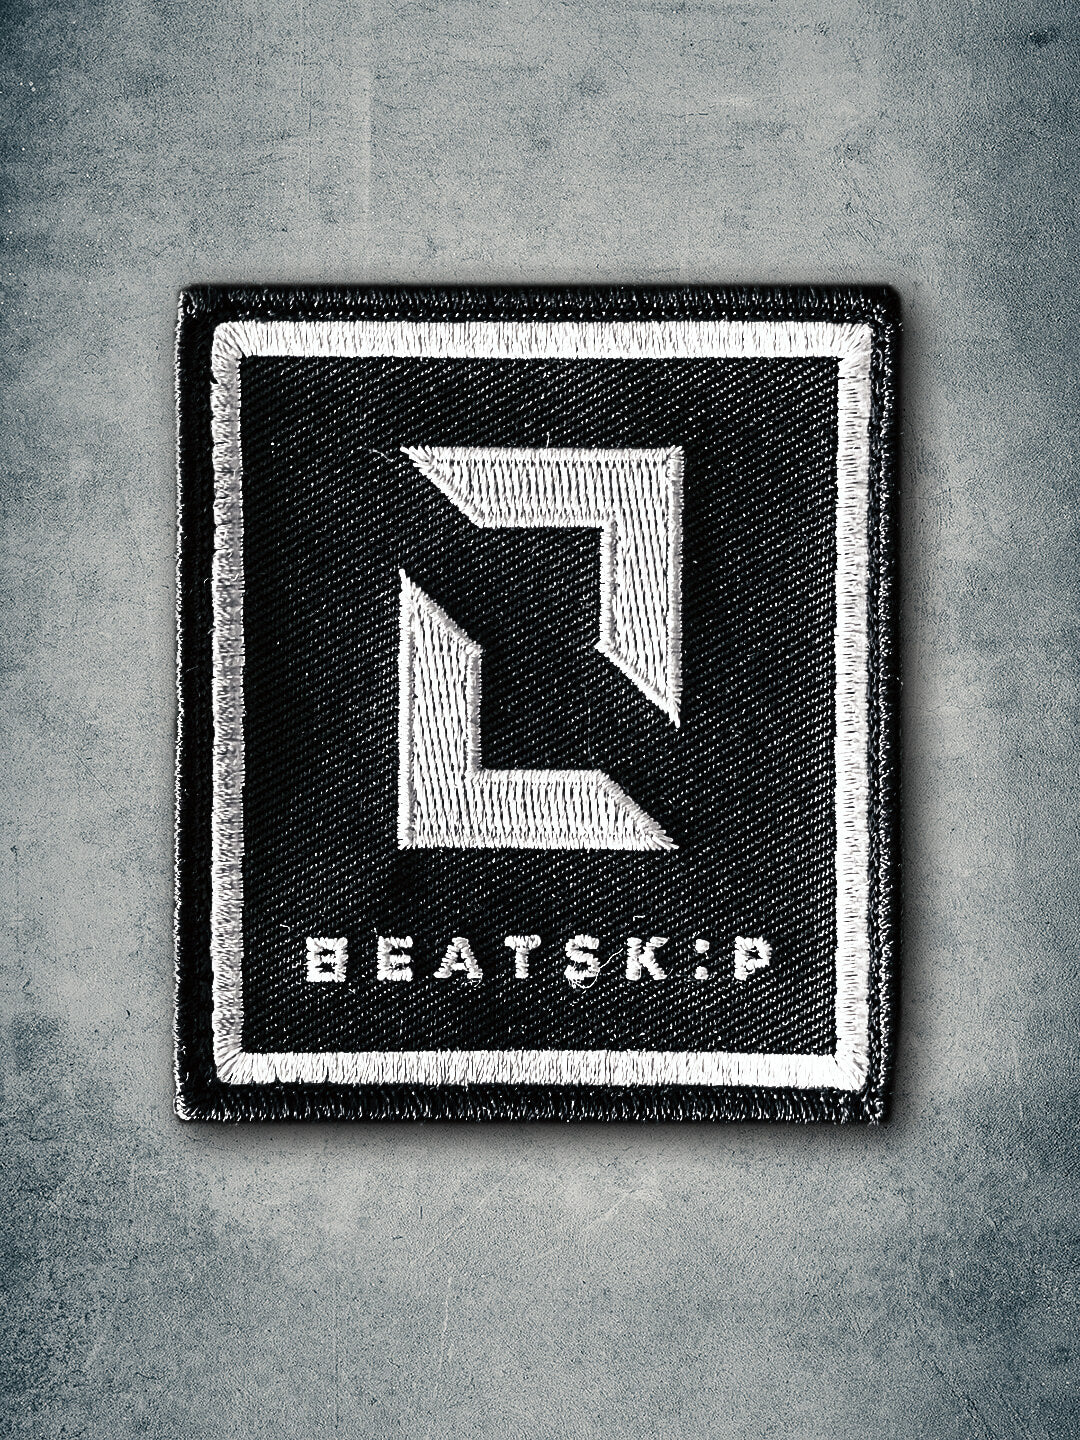 Beatskip White on Black Patch with velcro attachment